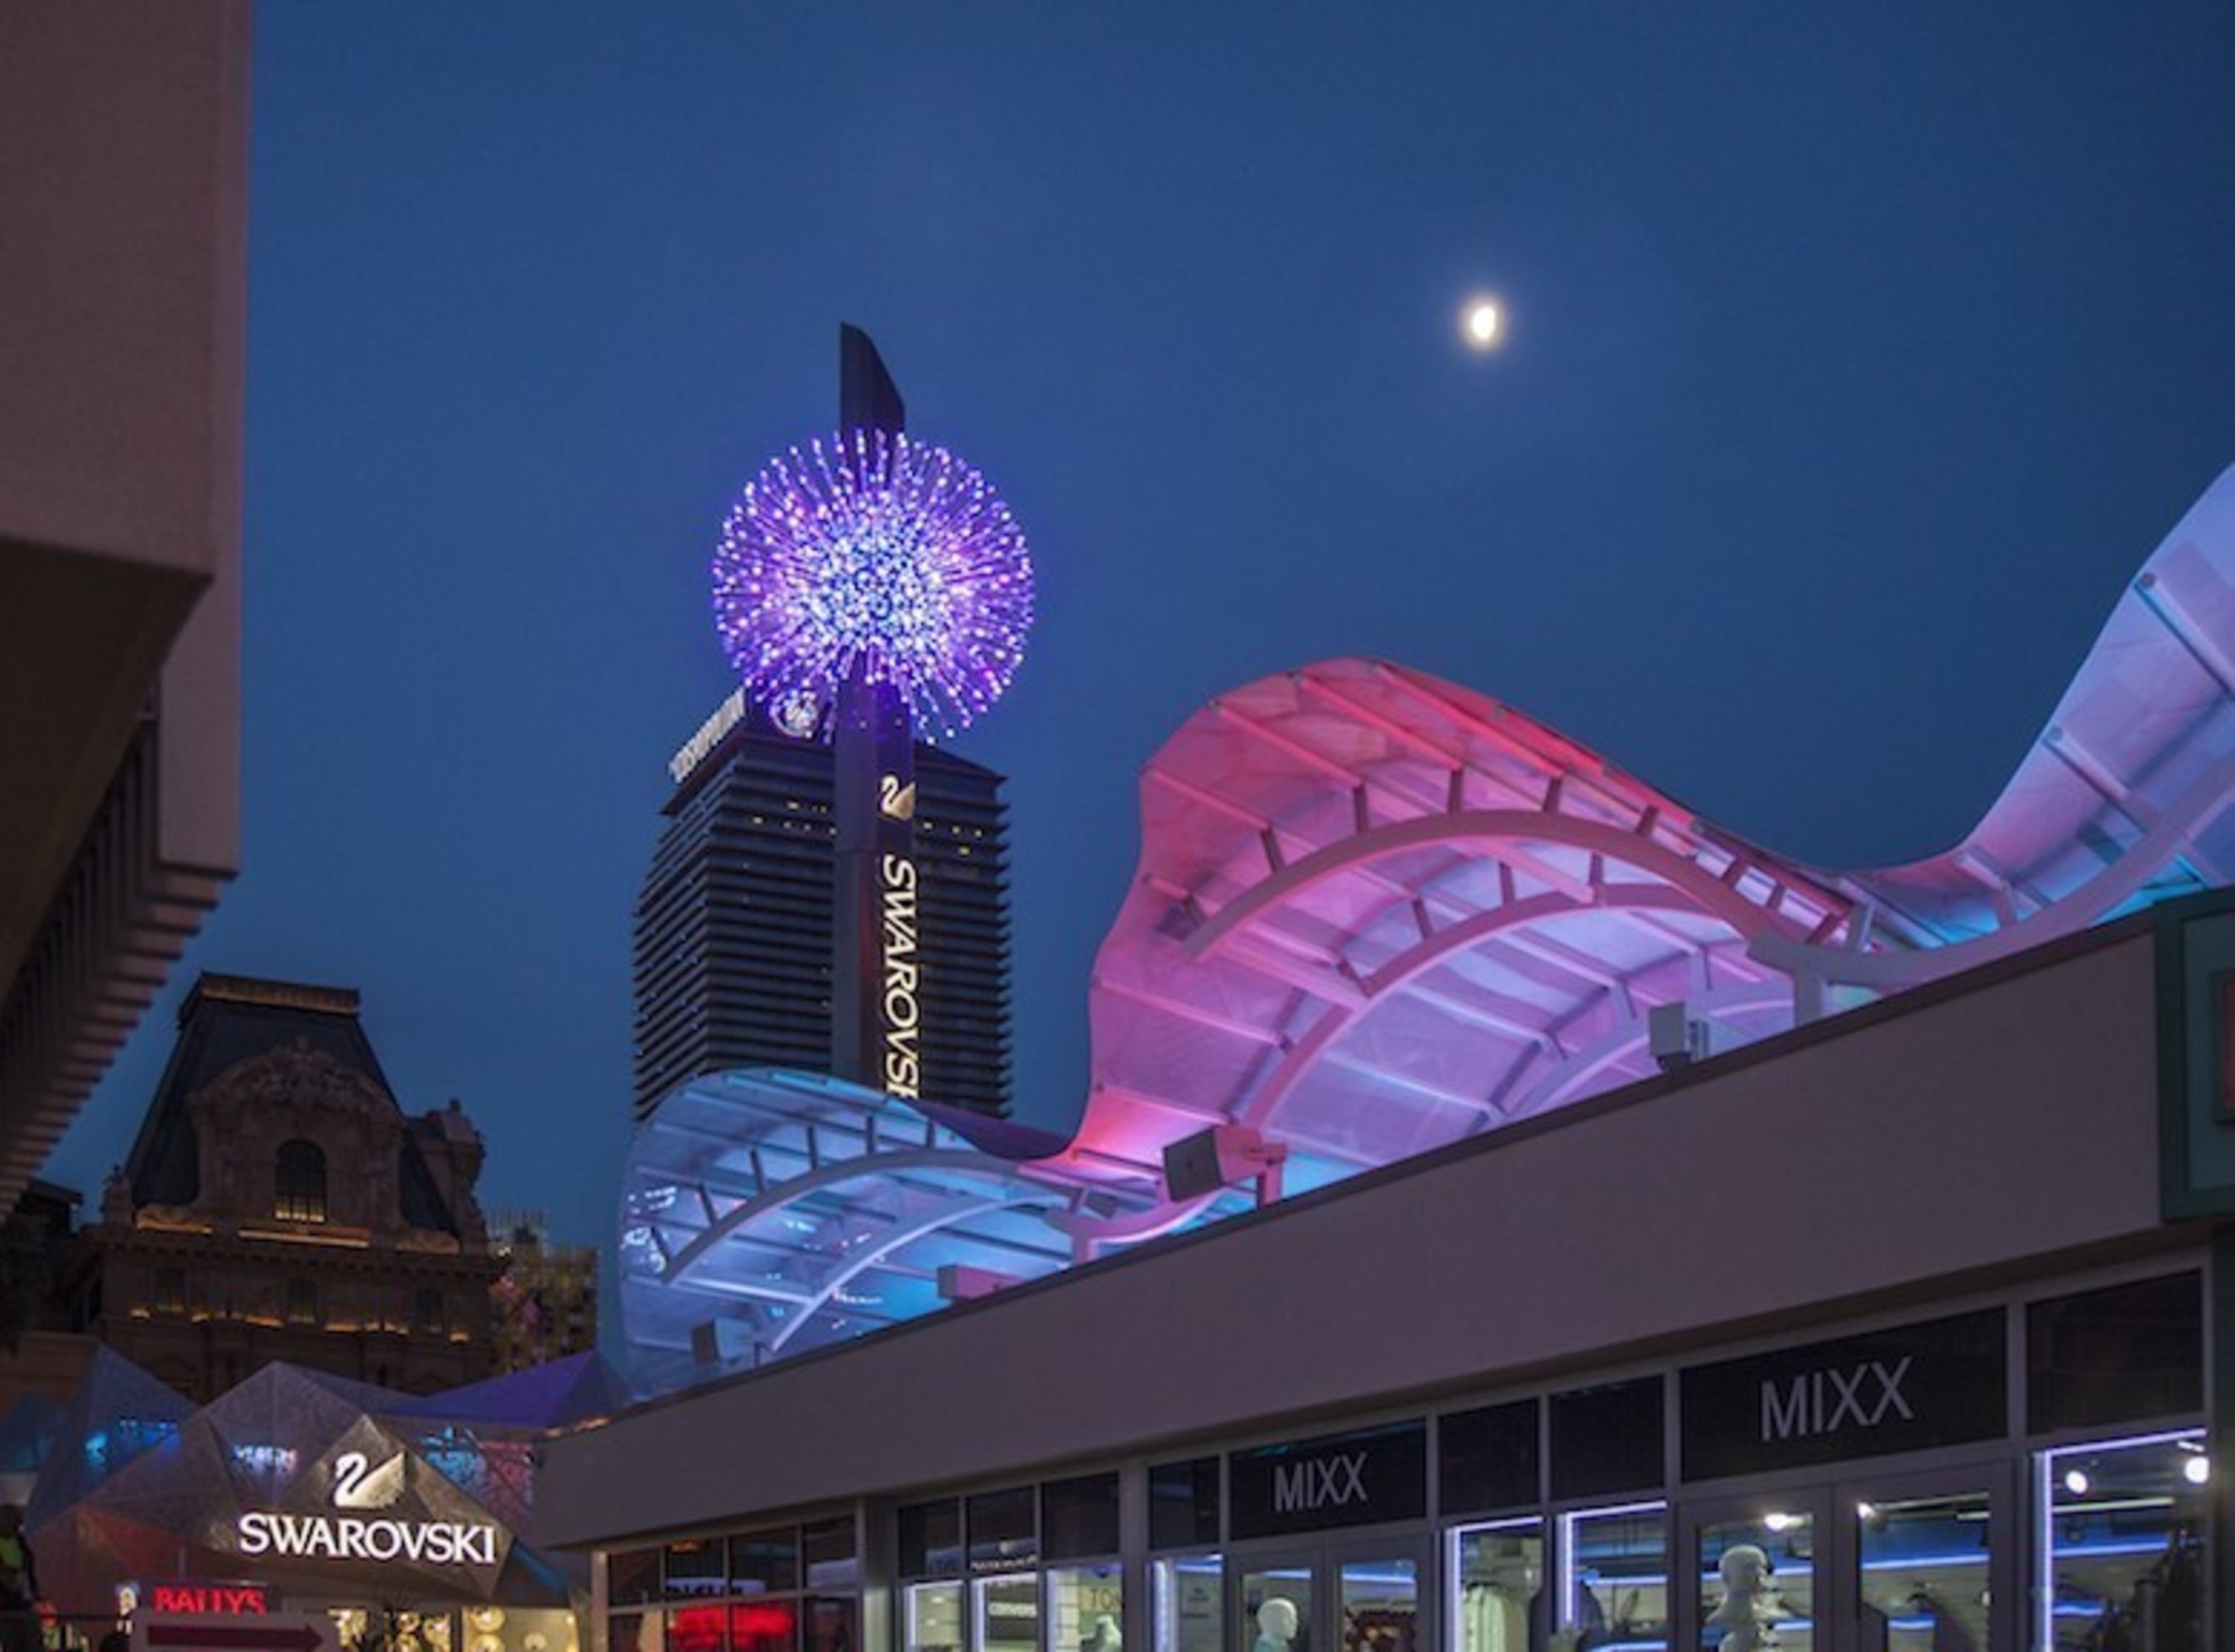 The Grand Bazaar Shops Las Vegas is the City's latest shopping attraction located at the heart of the famous Strip.  The centerpiece is the YESCO-designed LED starburst light fixture.